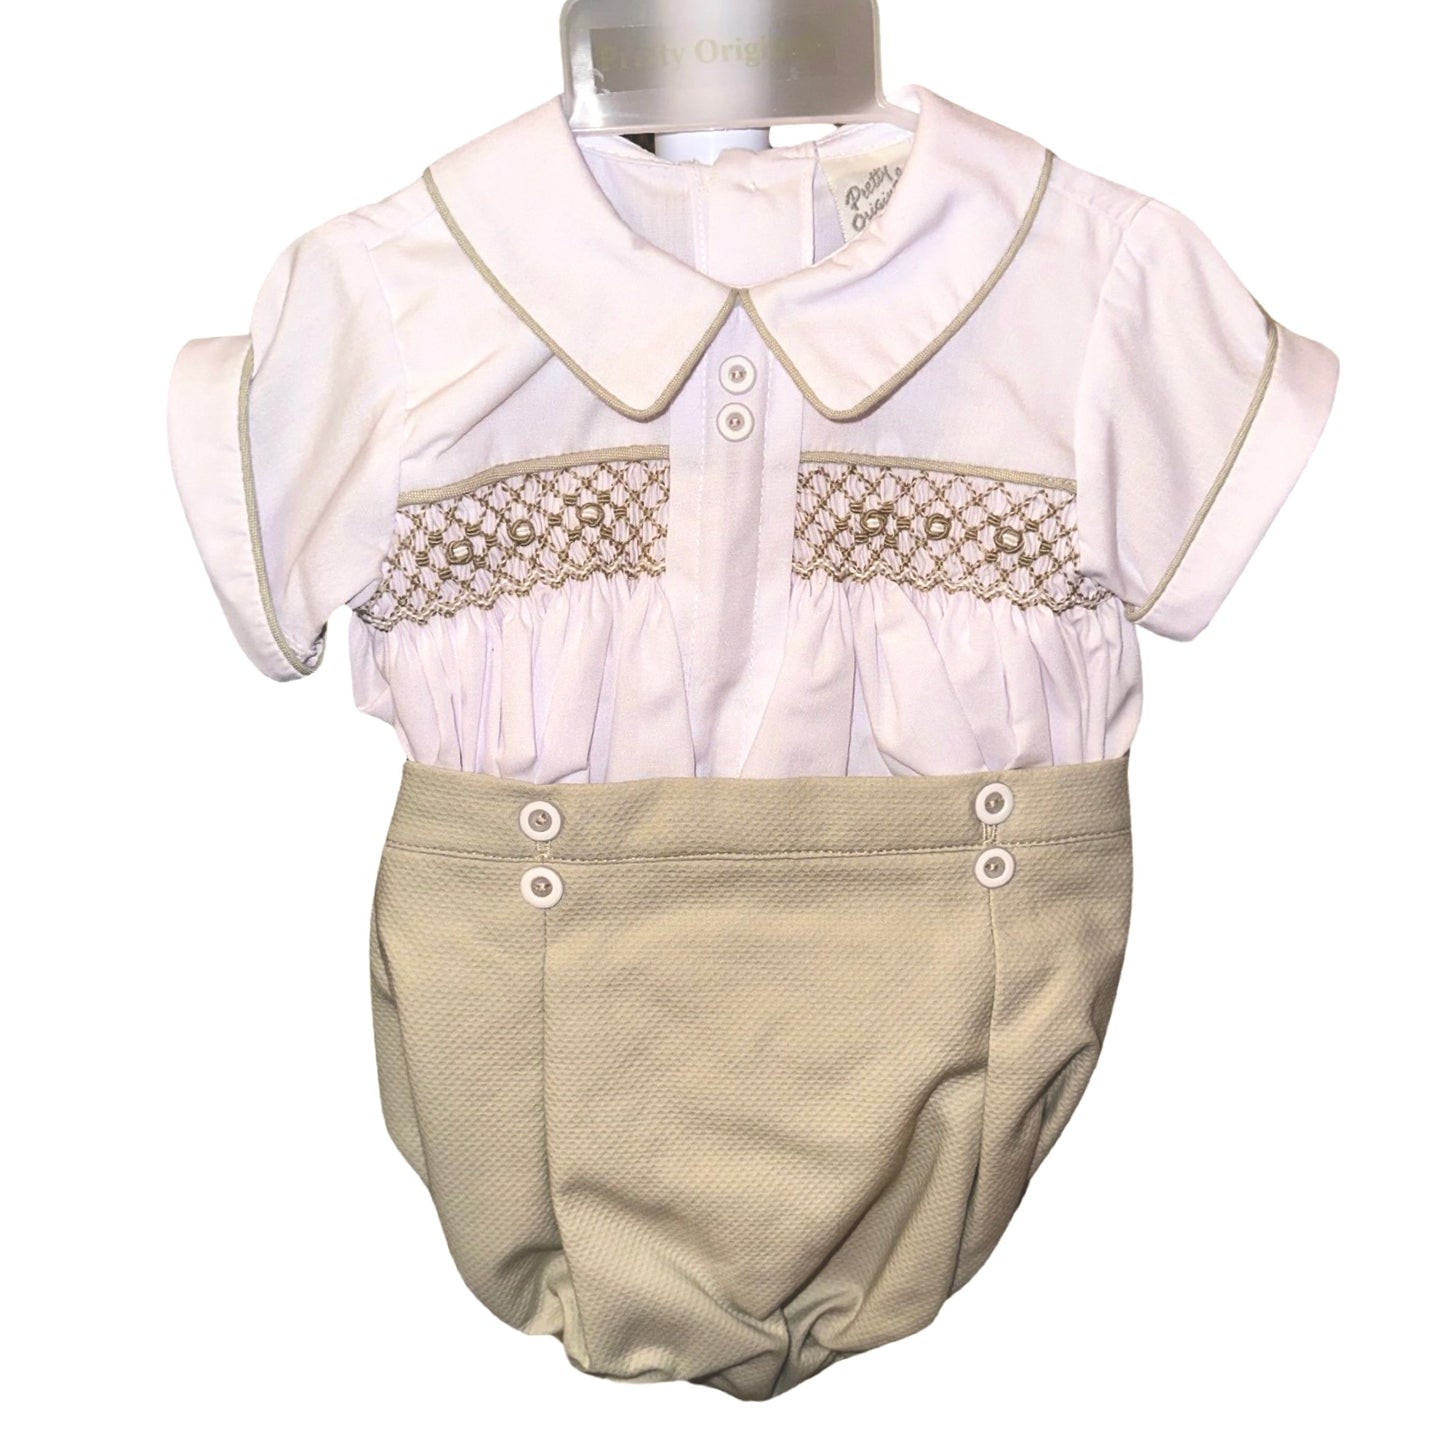 Pretty Originals Boys Wheat Smocked Outfit